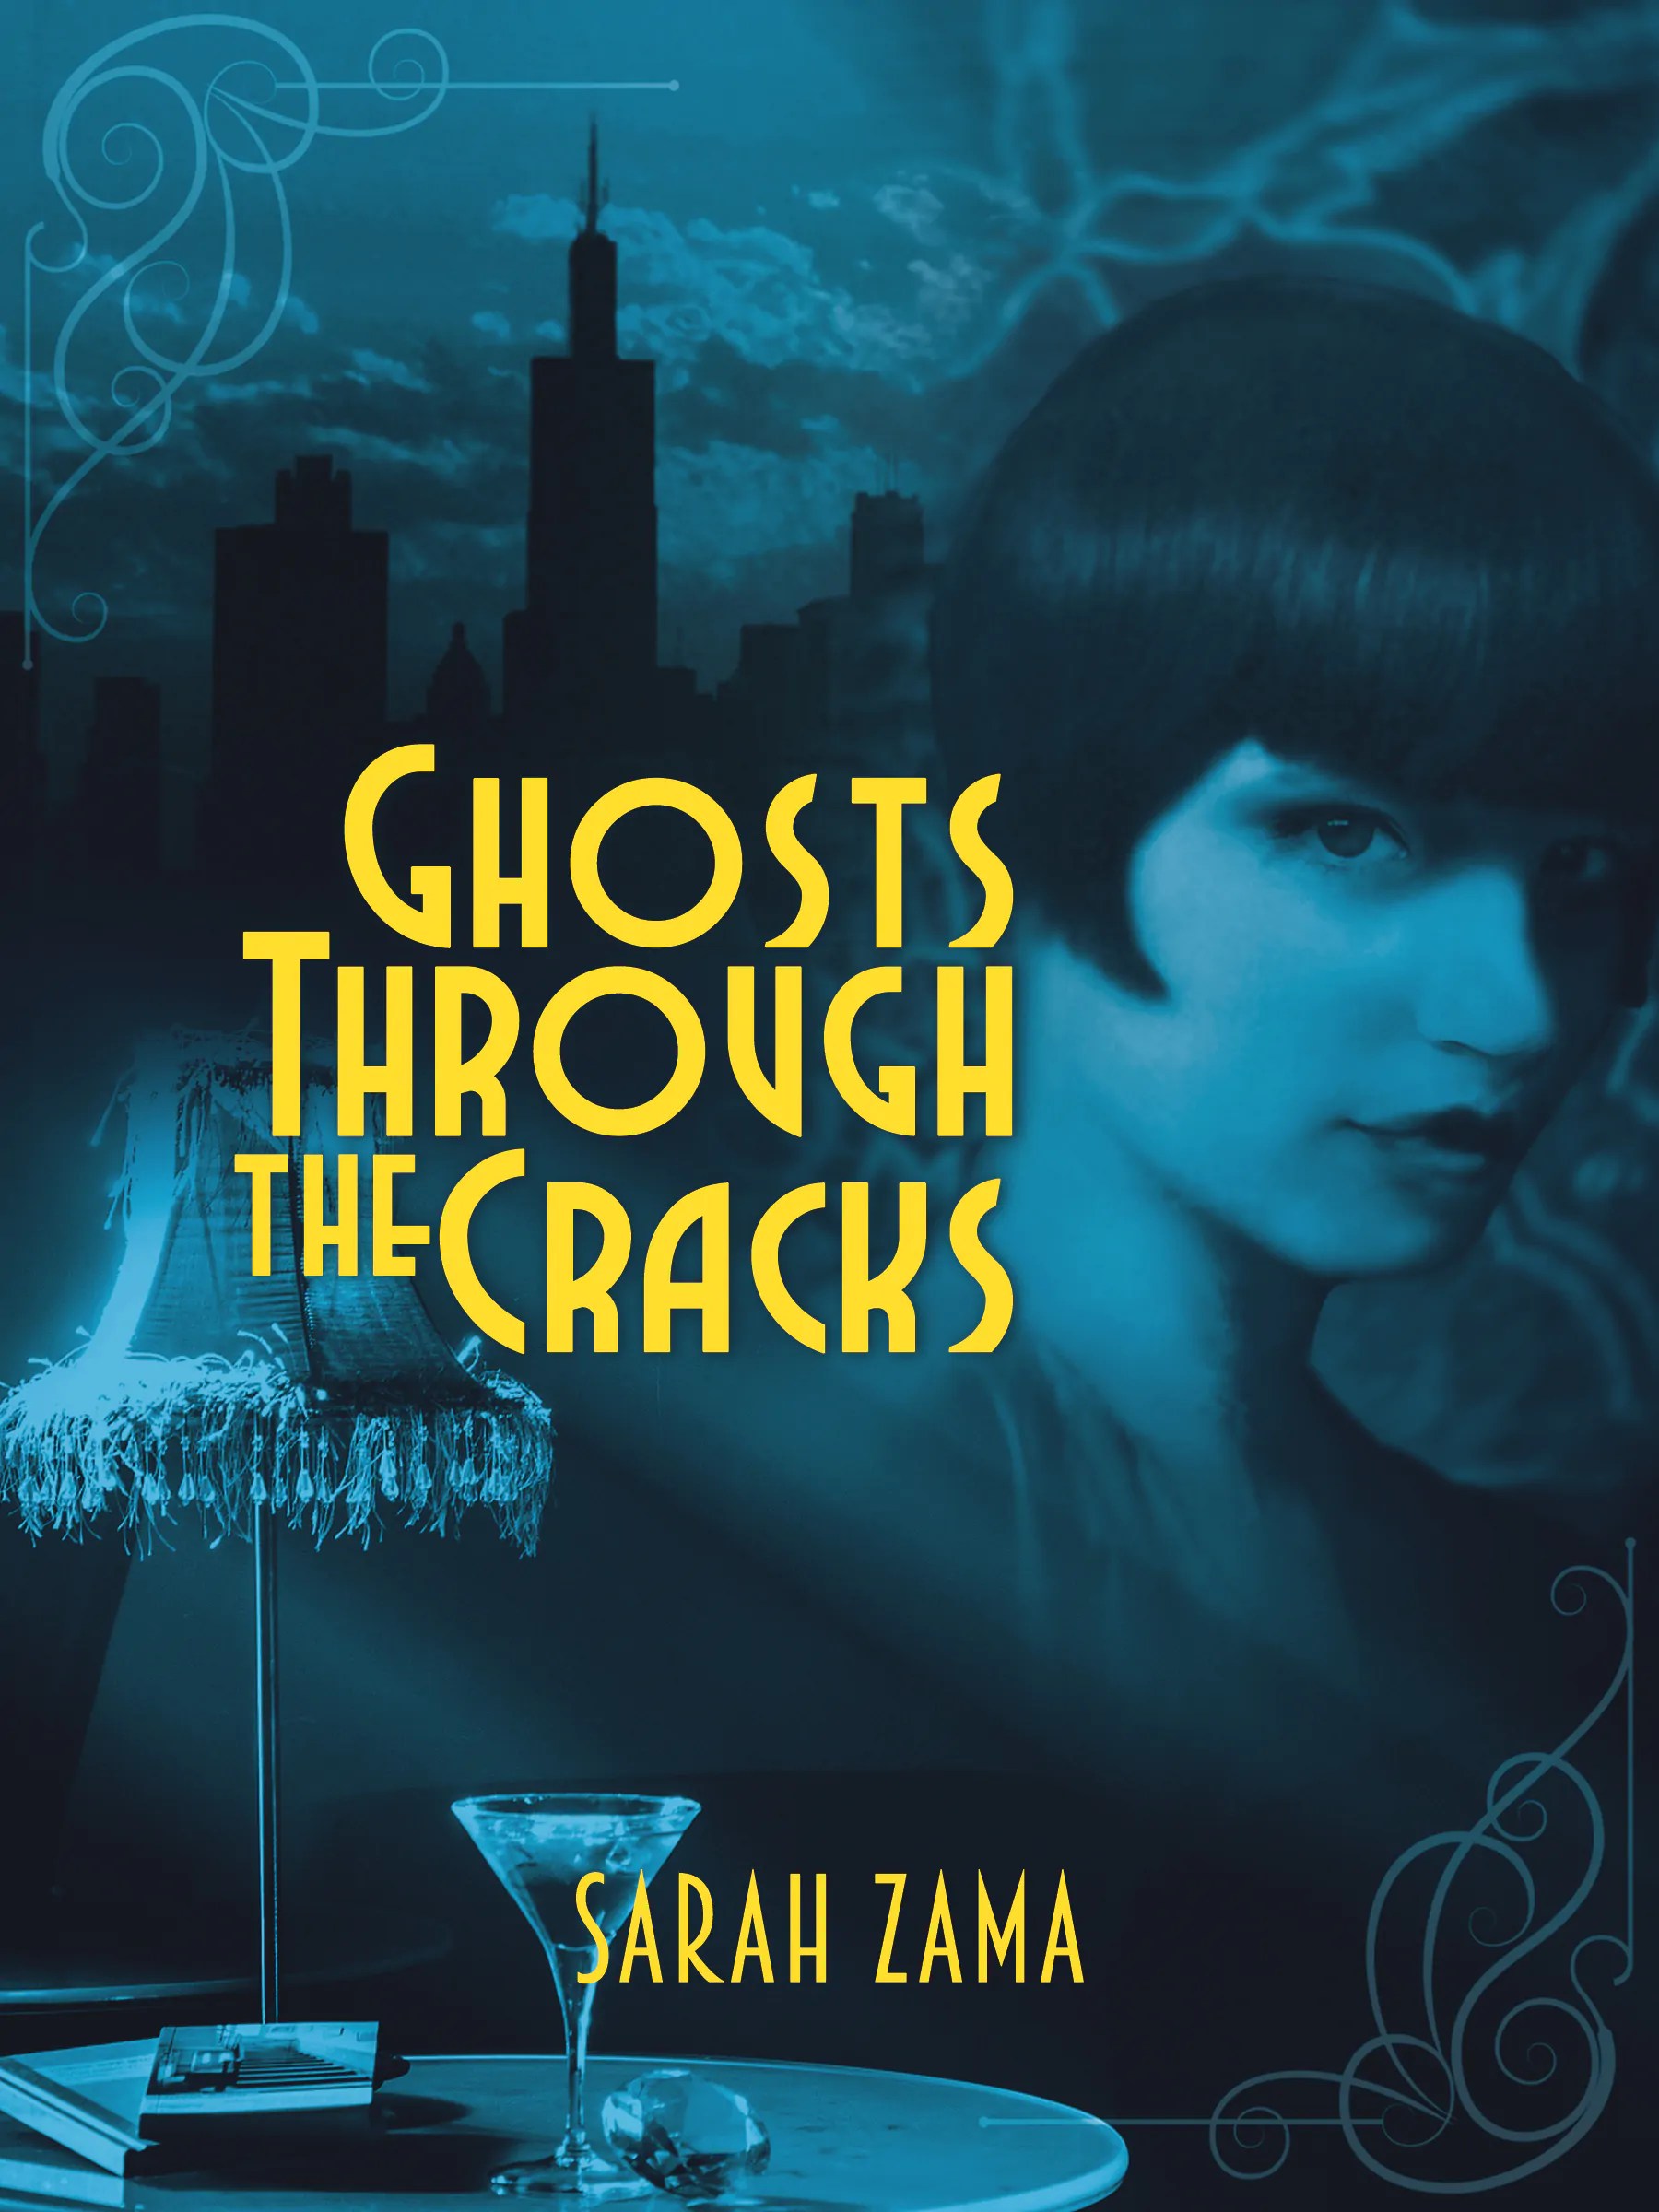 GHOSTS THROUGH THE CRACKS (Sarah Zama) When she arrived to America, Susie thought she found everything she never dared to dream of in China. But only when she meets Blood, she realises the freedom to dress as she wants, make up her face, drink and smoke and dance is just a little, unimportant part of the true freedom she yearns for